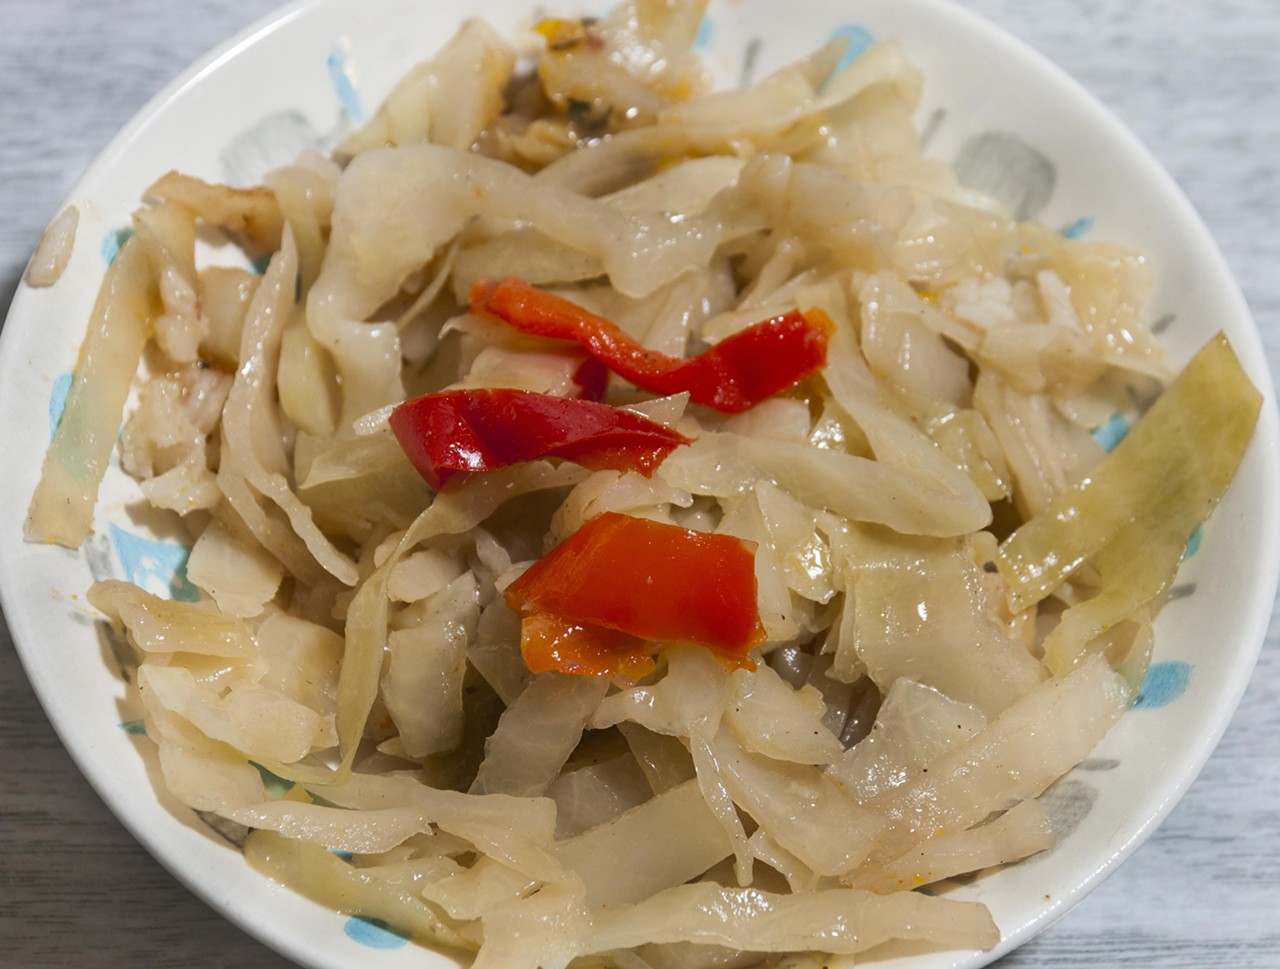 A surprisingly complex, lightly cooked mix of cabbage, onion, and bell pepper.